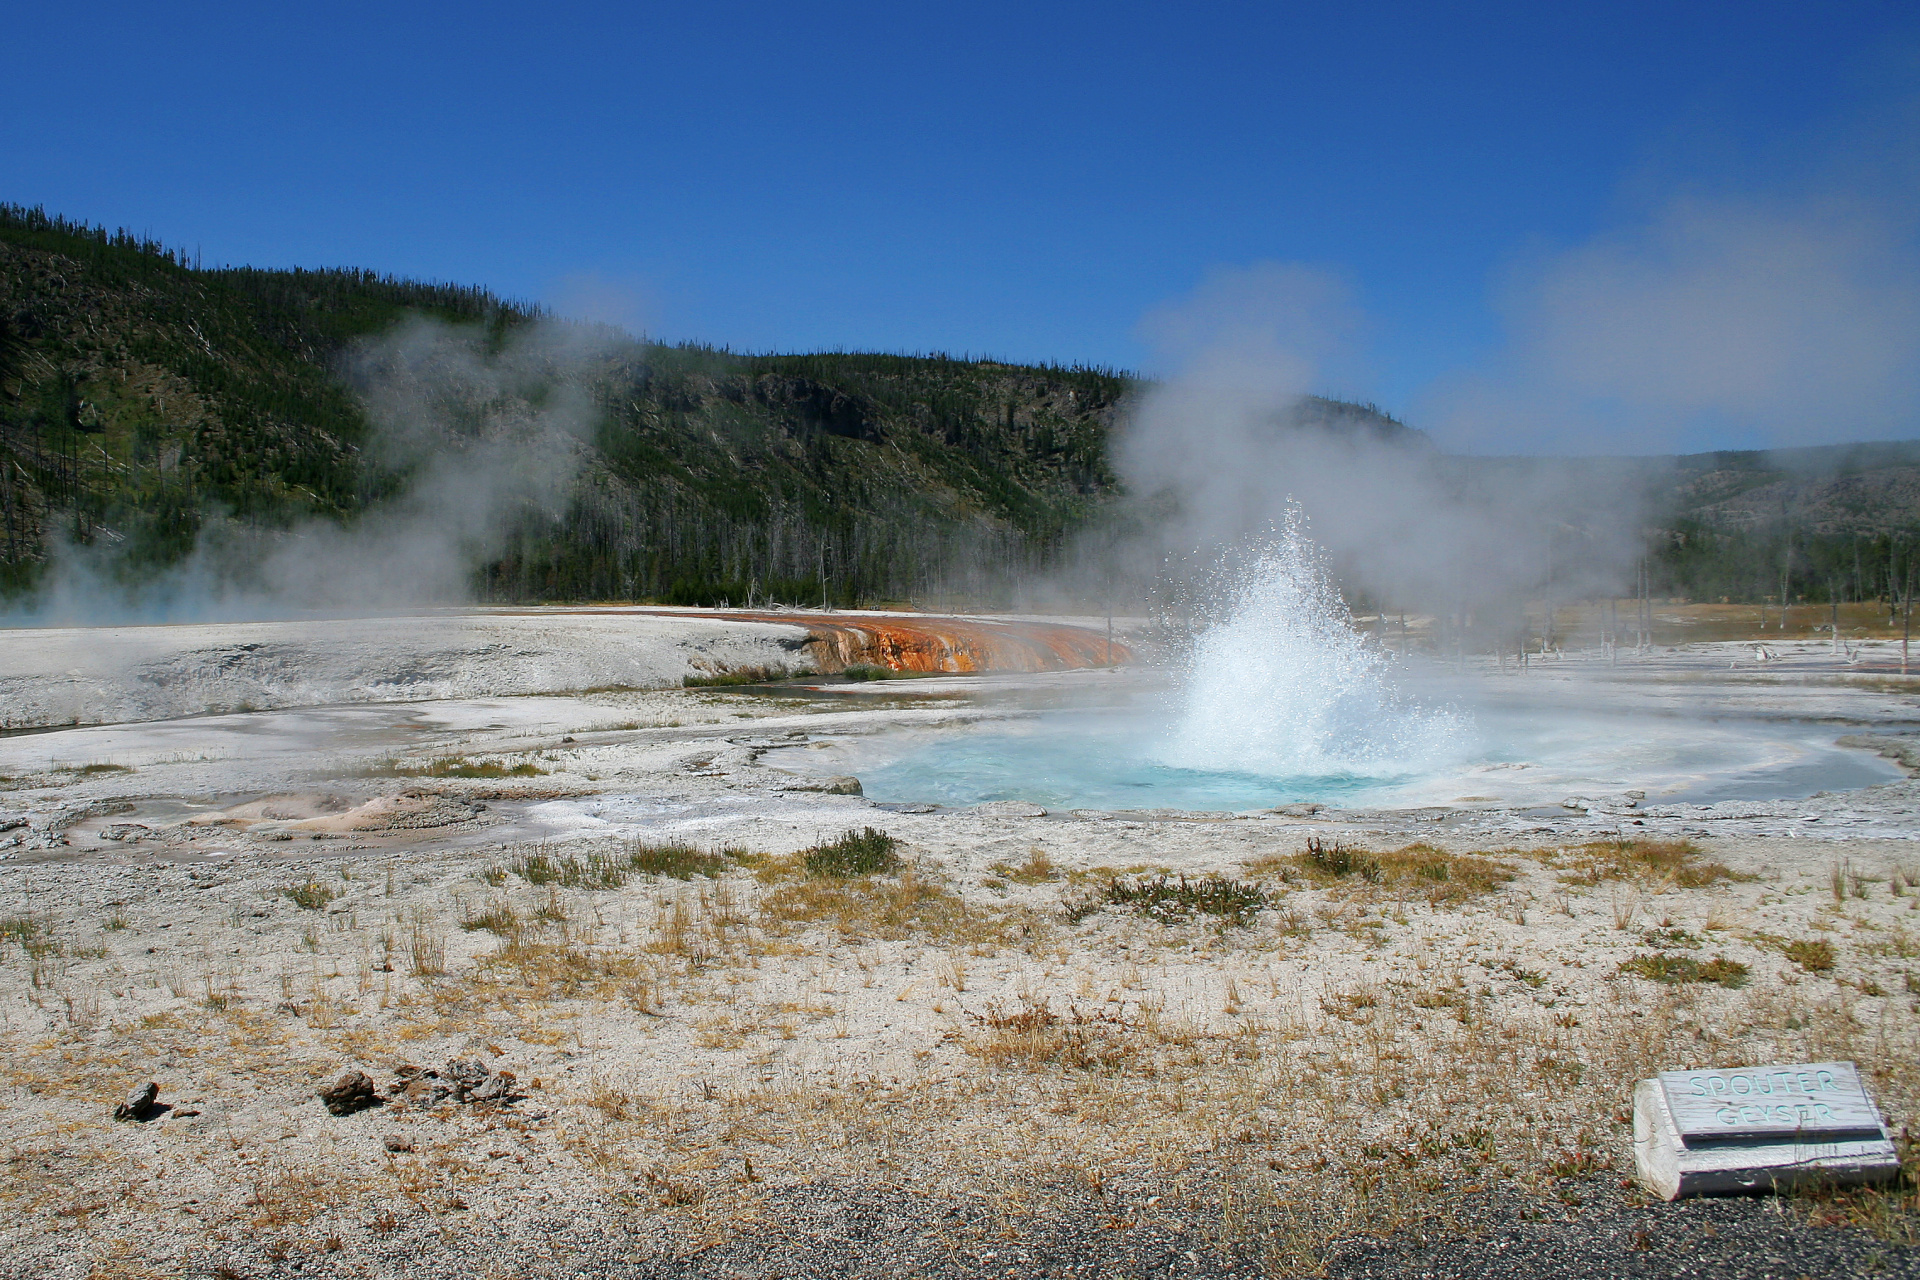 Spouter Geyser (Travels » US Trip 1: Cheyenne Country » The Journey » Yellowstone National Park » Geysers, Hot Springs and Lakes » Black Sand Basin)